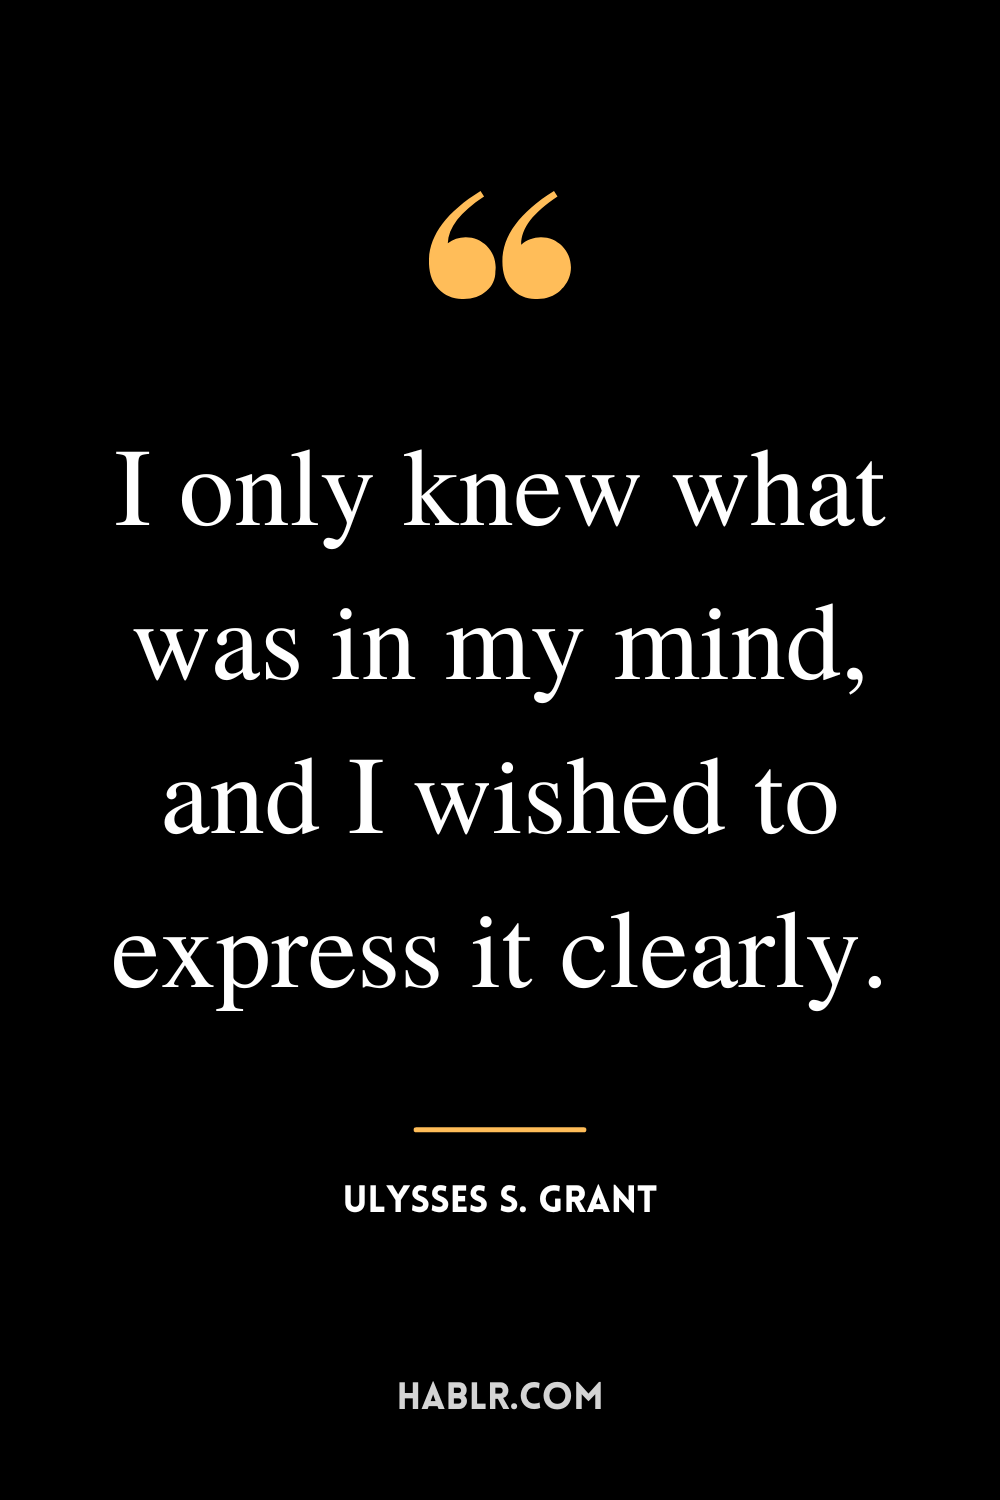 “I only knew what was in my mind, and I wished to express it clearly.” -Ulysses S. Grant